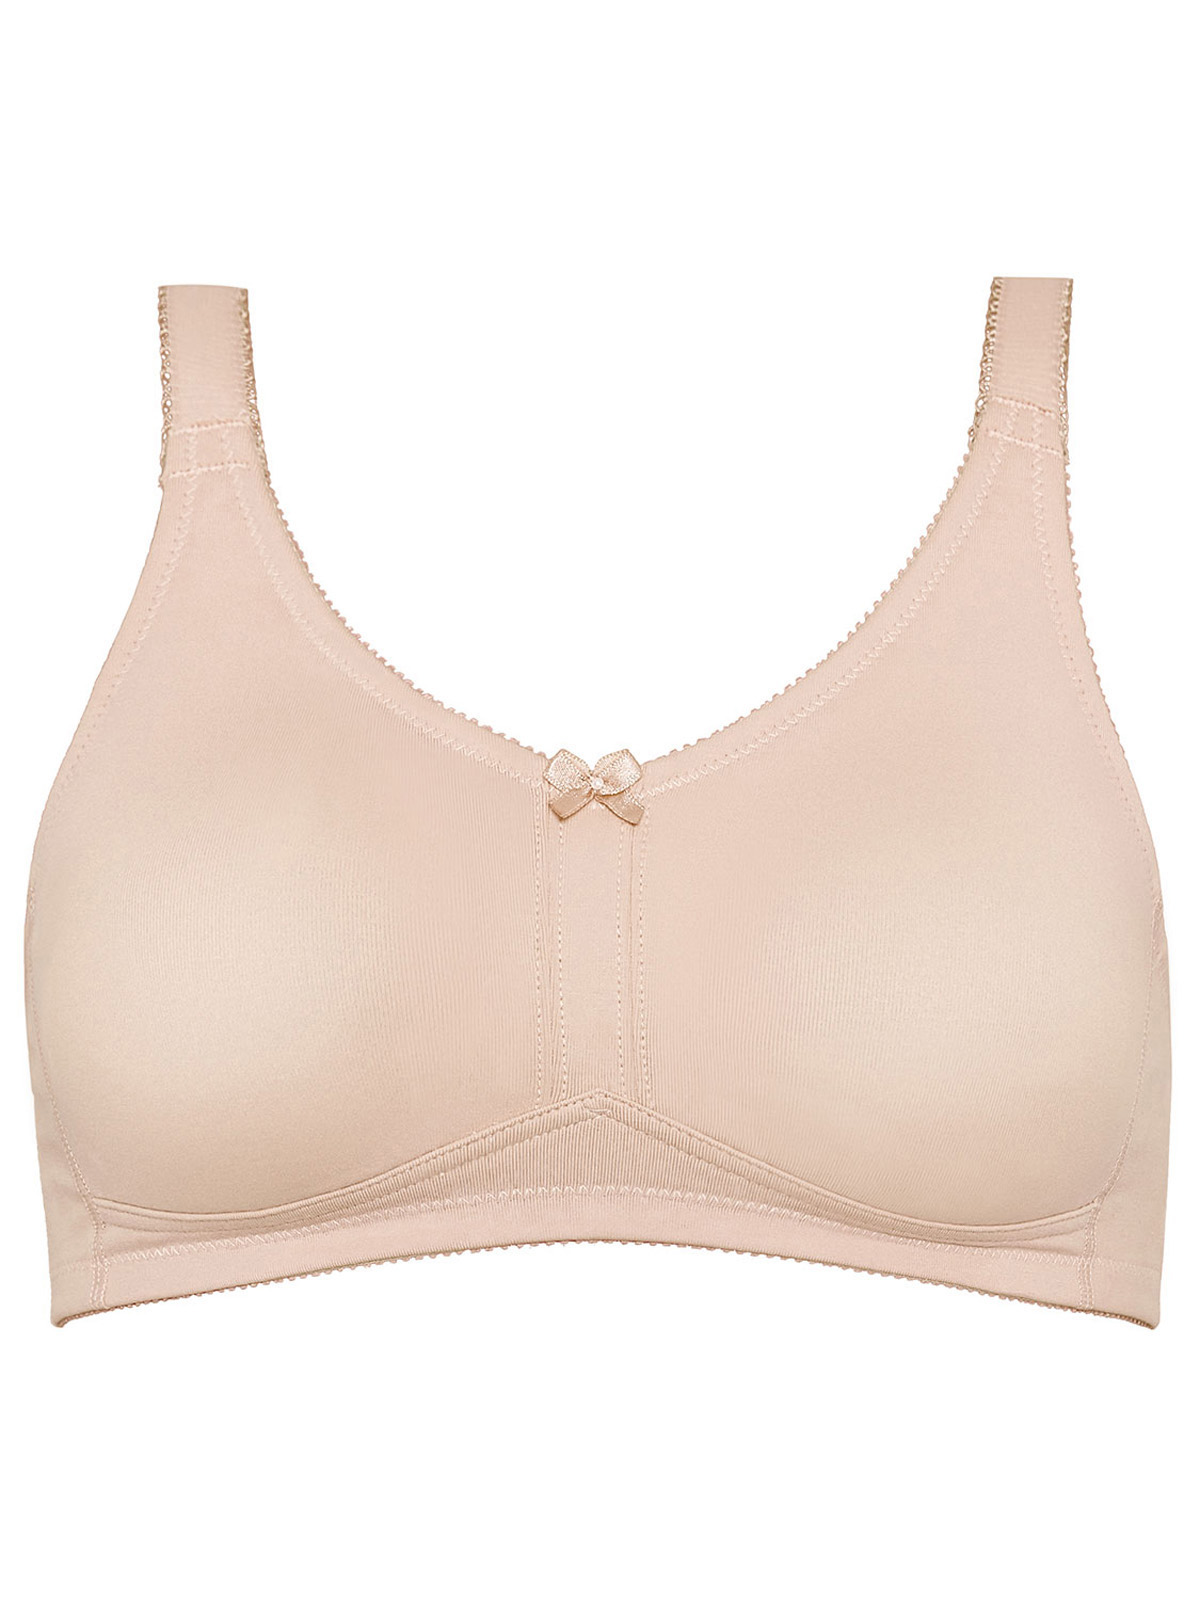 Naturana Naturana Assorted Full Soft Cup Bras Size To B C F